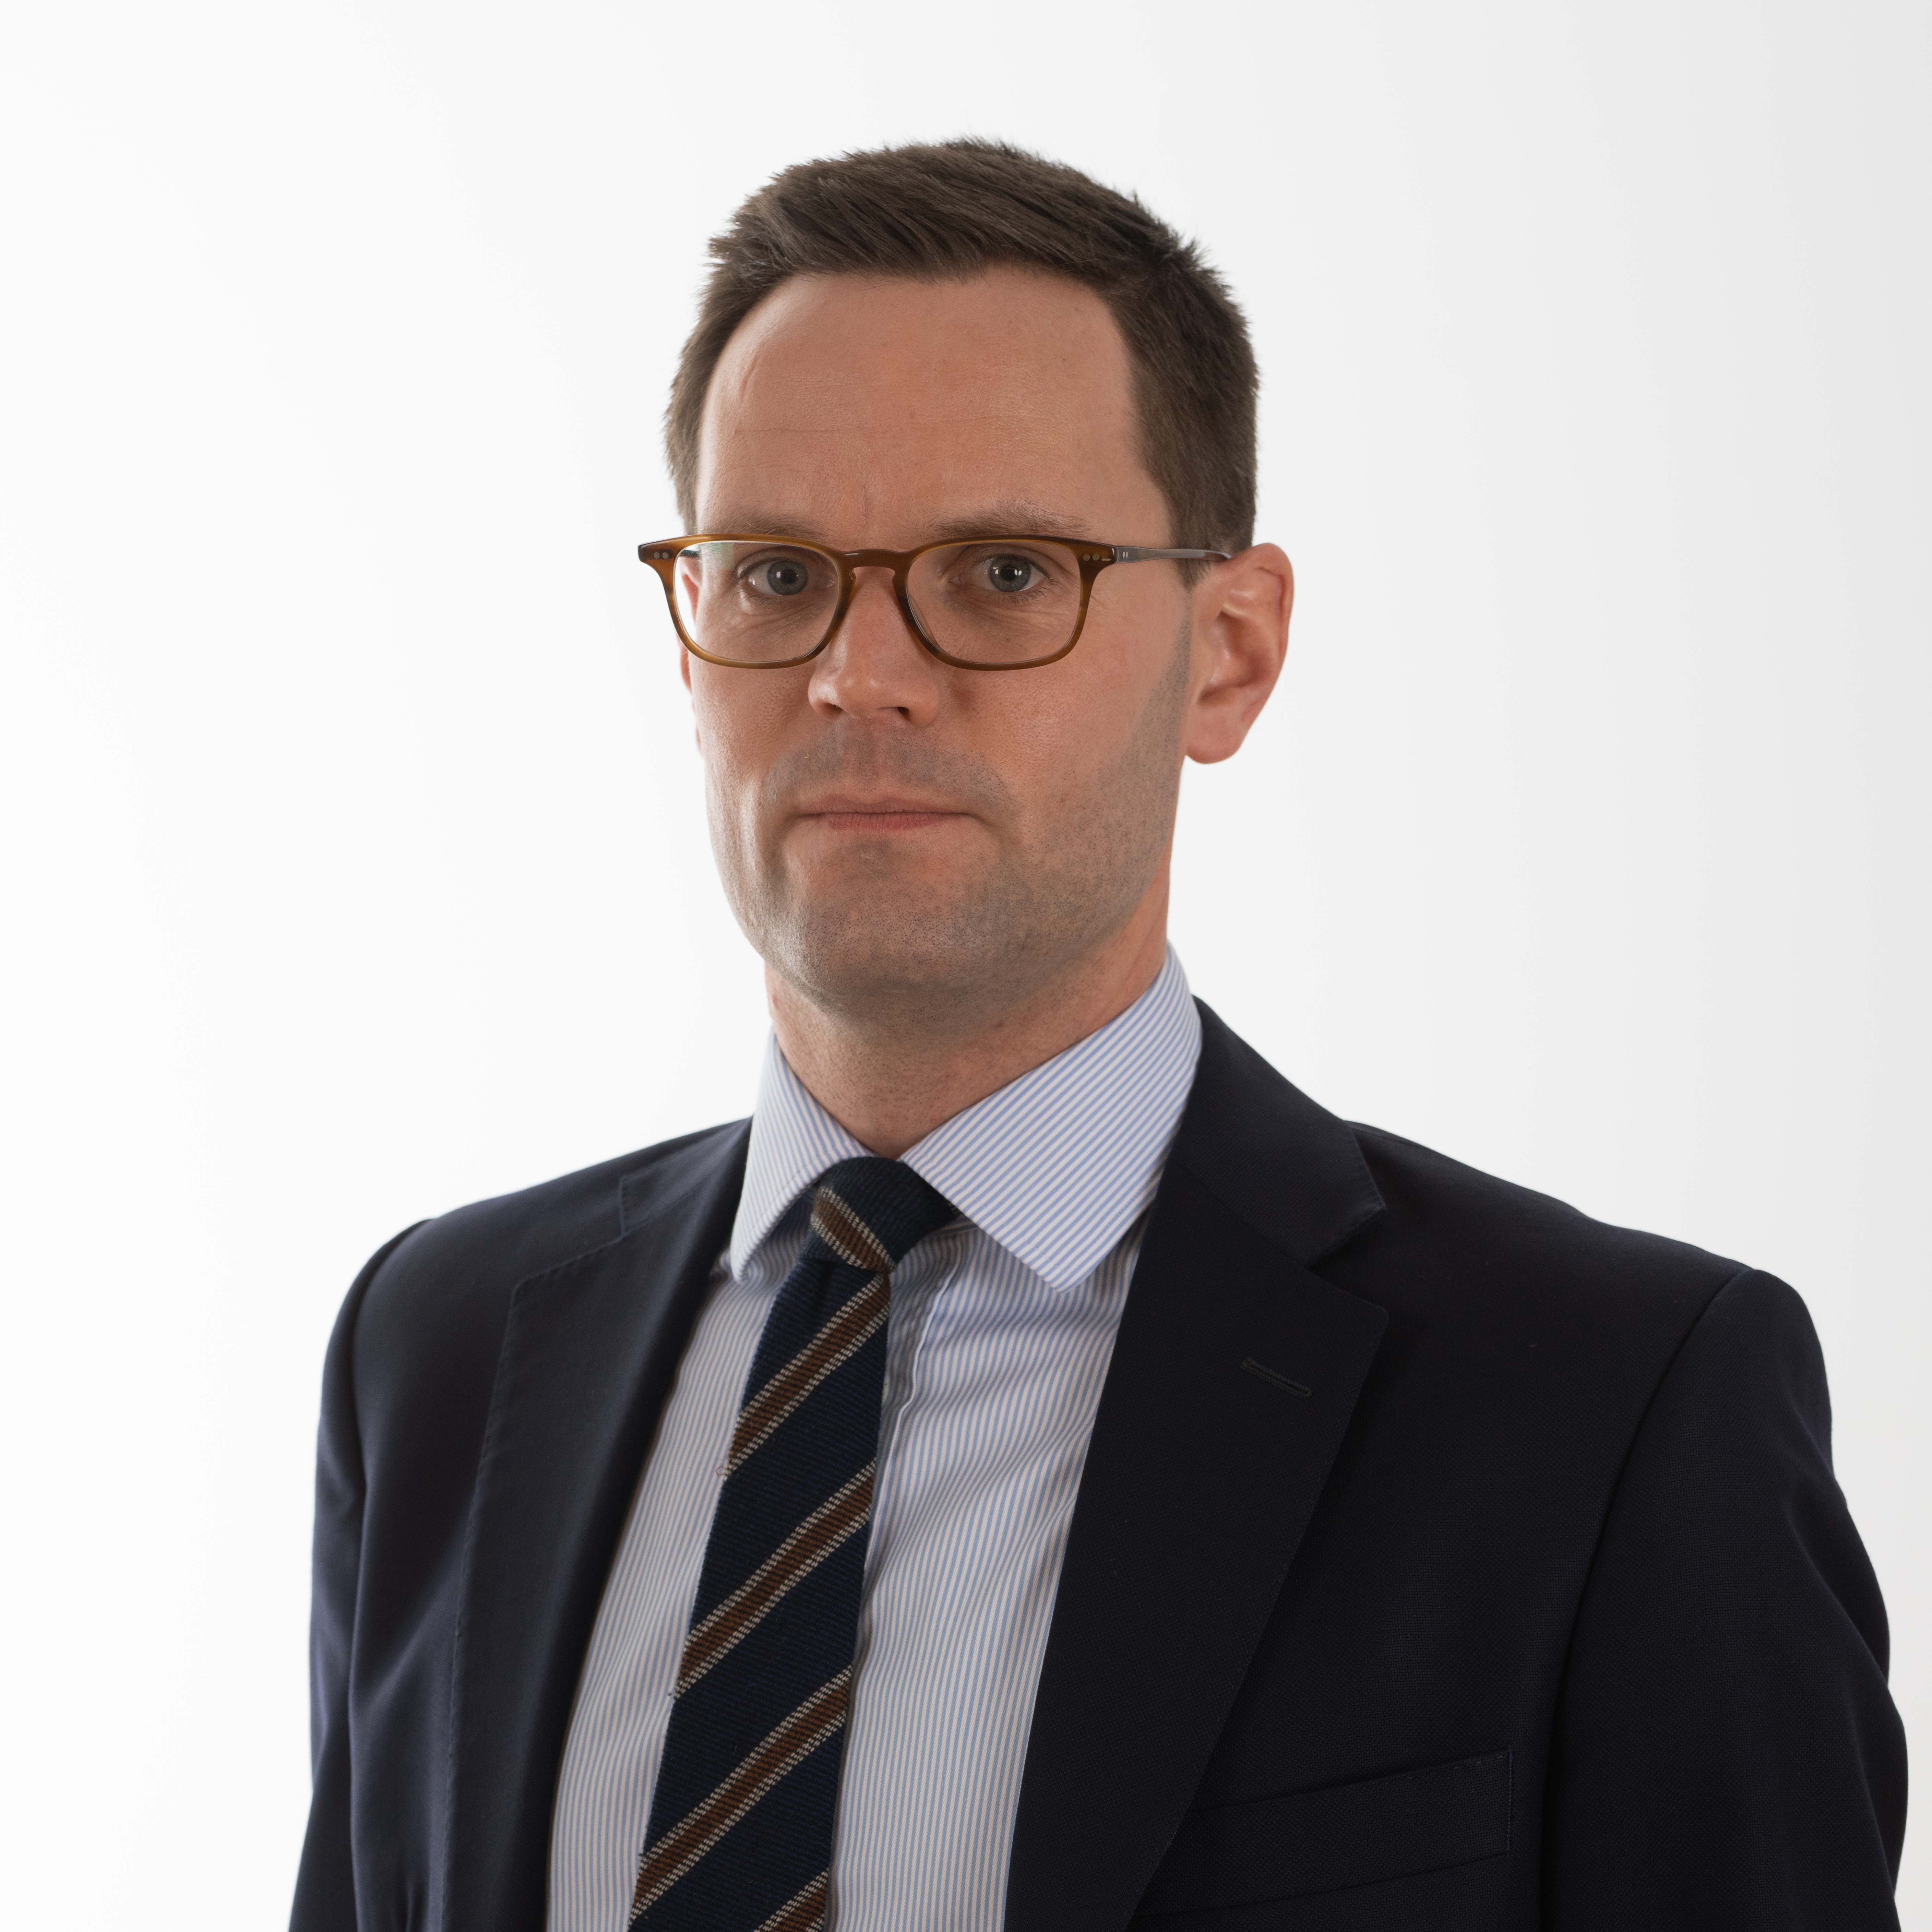 Stuart Bromley, Head of Personal Lines Underwriting